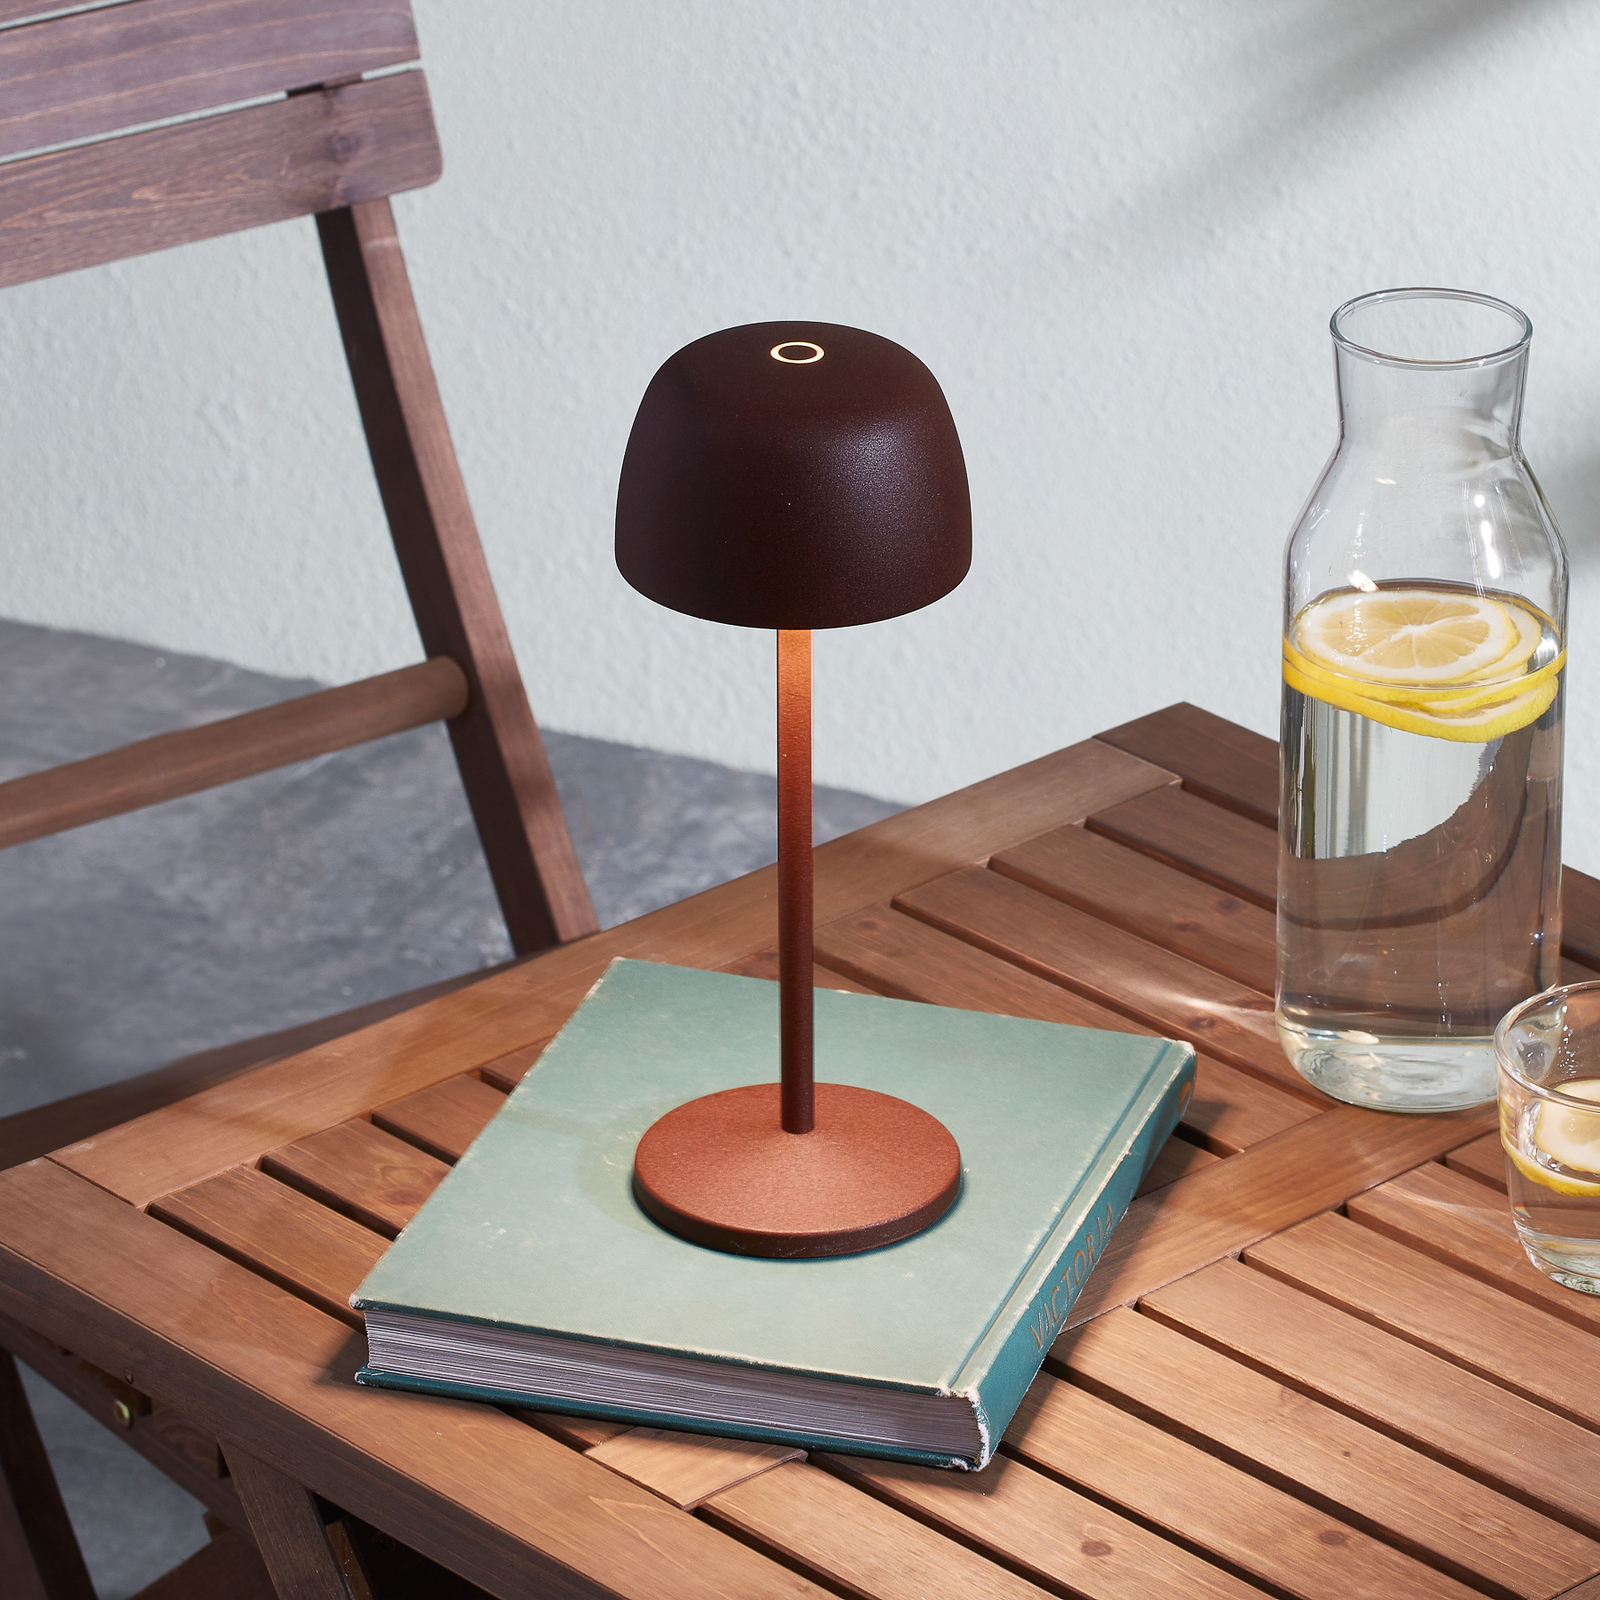 Lindby LED table lamp Arietty, rust brown, set of 2